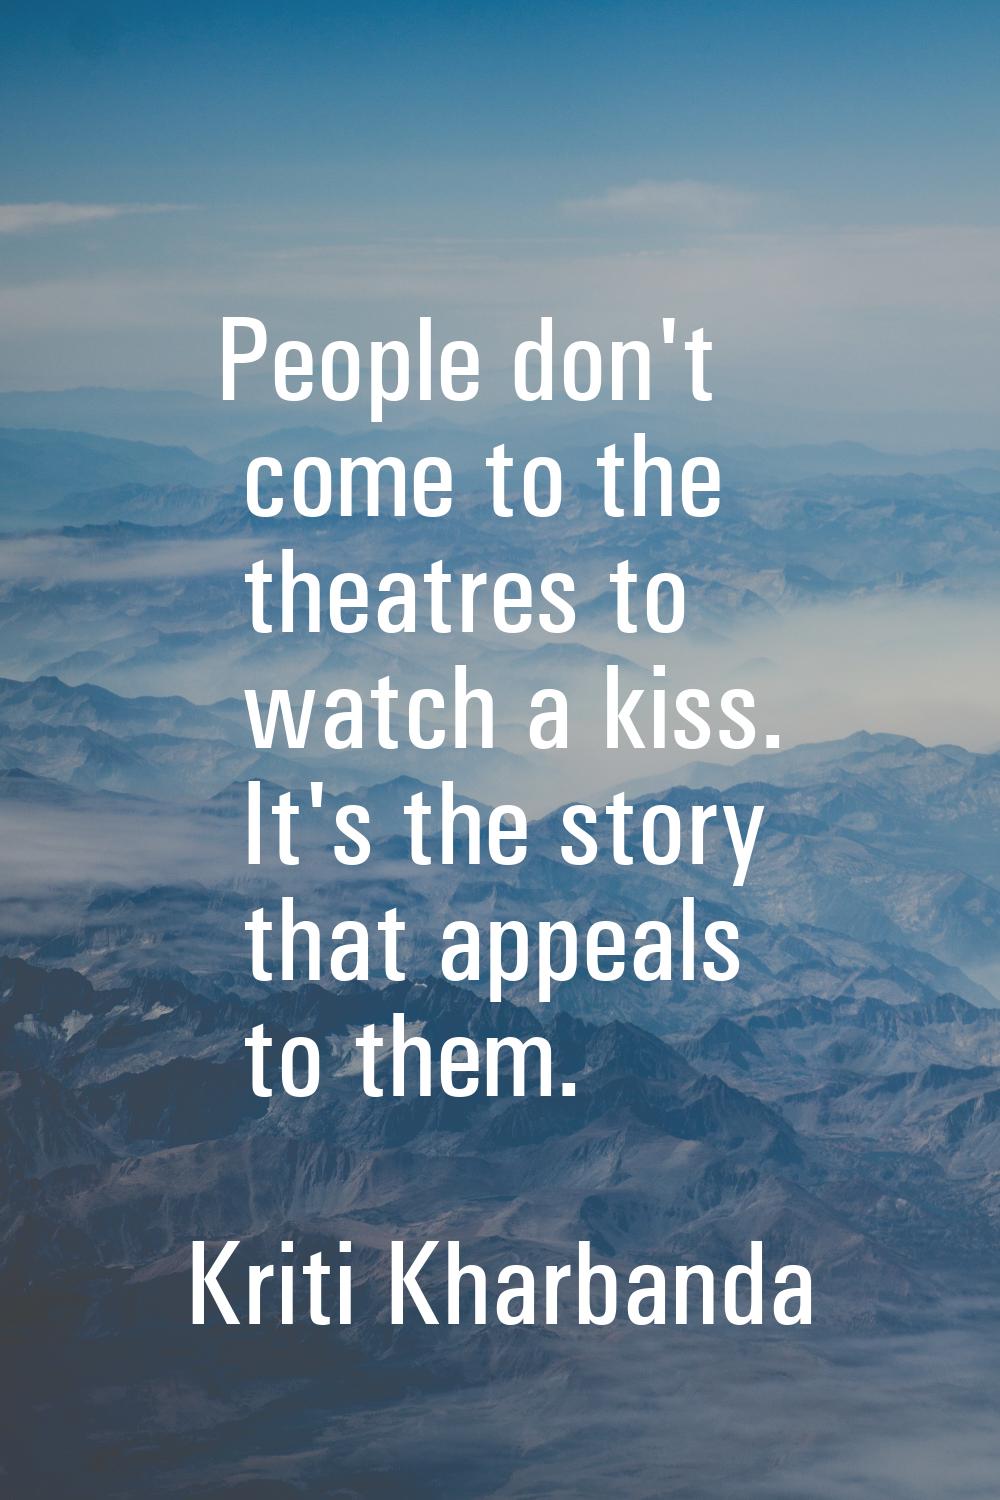 People don't come to the theatres to watch a kiss. It's the story that appeals to them.